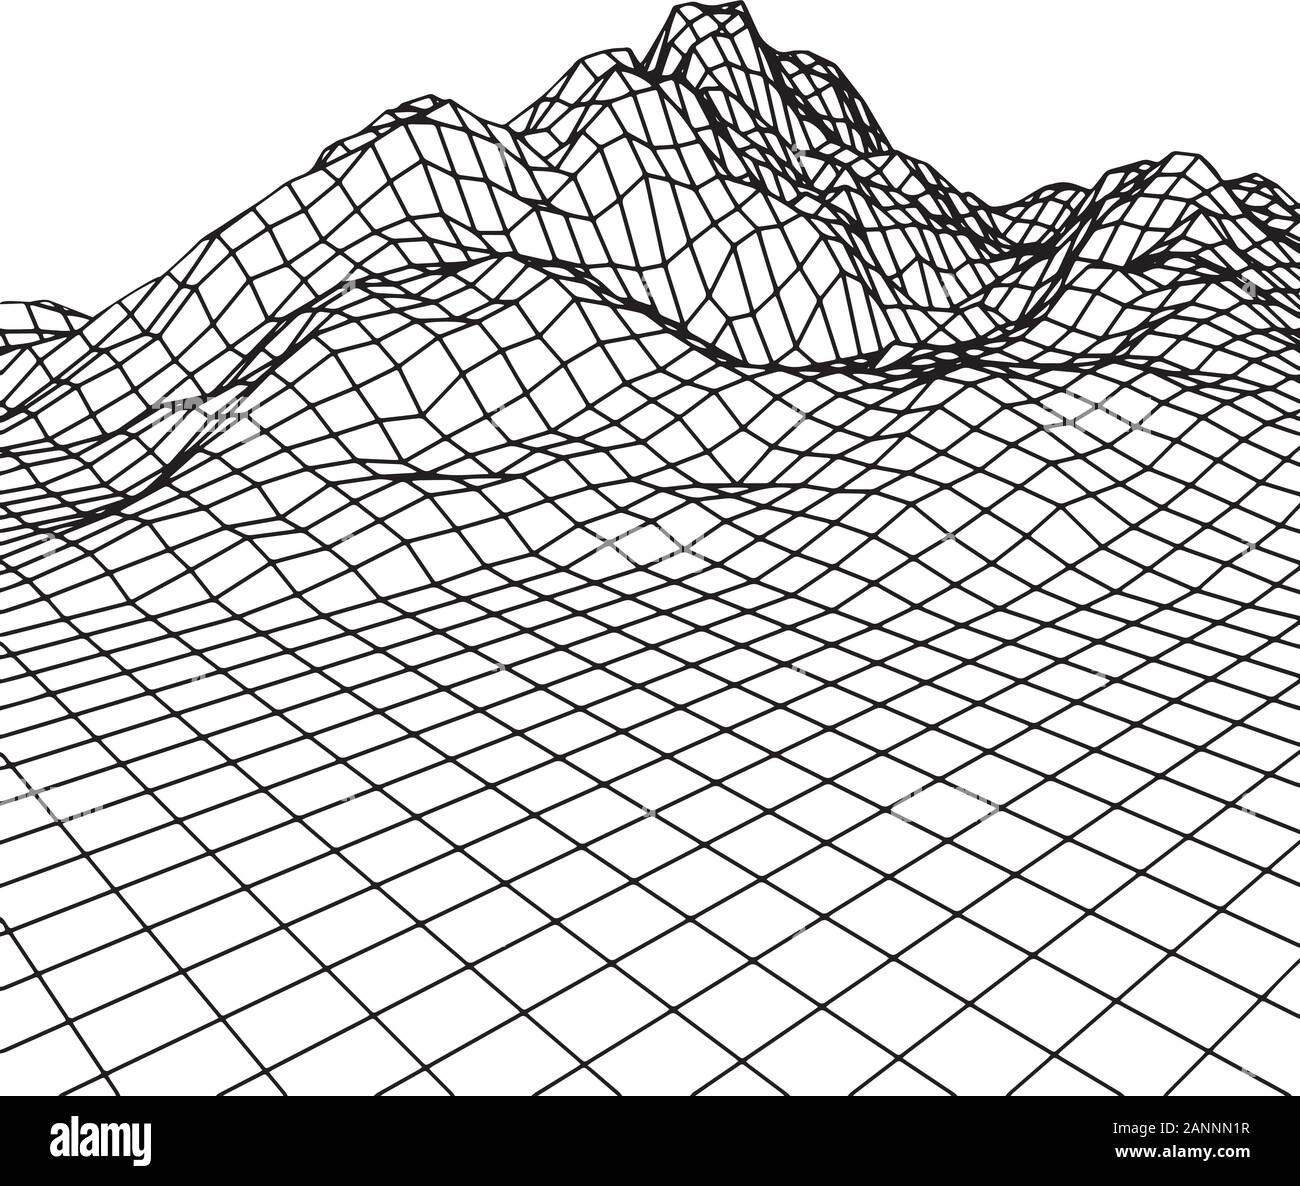 Futuristic grid rocks in black and white, retro hipster background template. Stock Vector